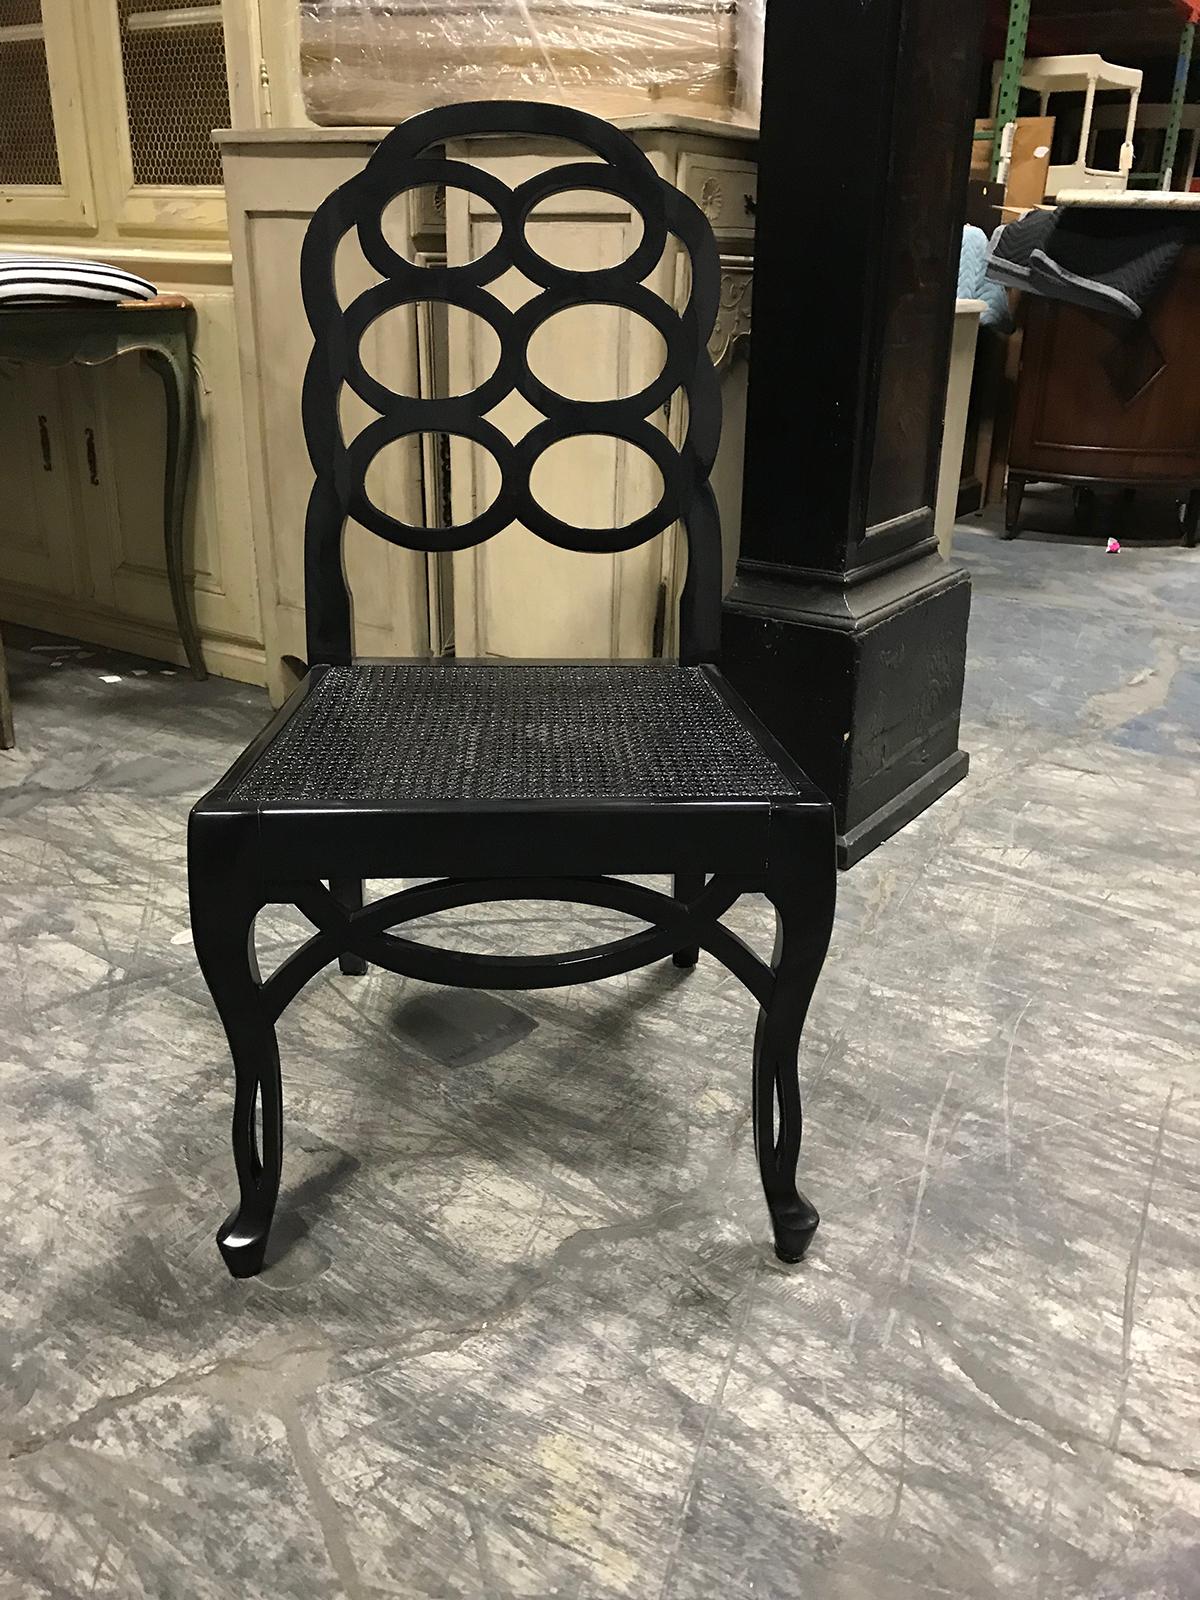 Assembled set of 8 20th century loop dining chairs in the style of Frances Elkins
Black lacquered, recovered
Two armchairs, six side chairs.
Measures: 22